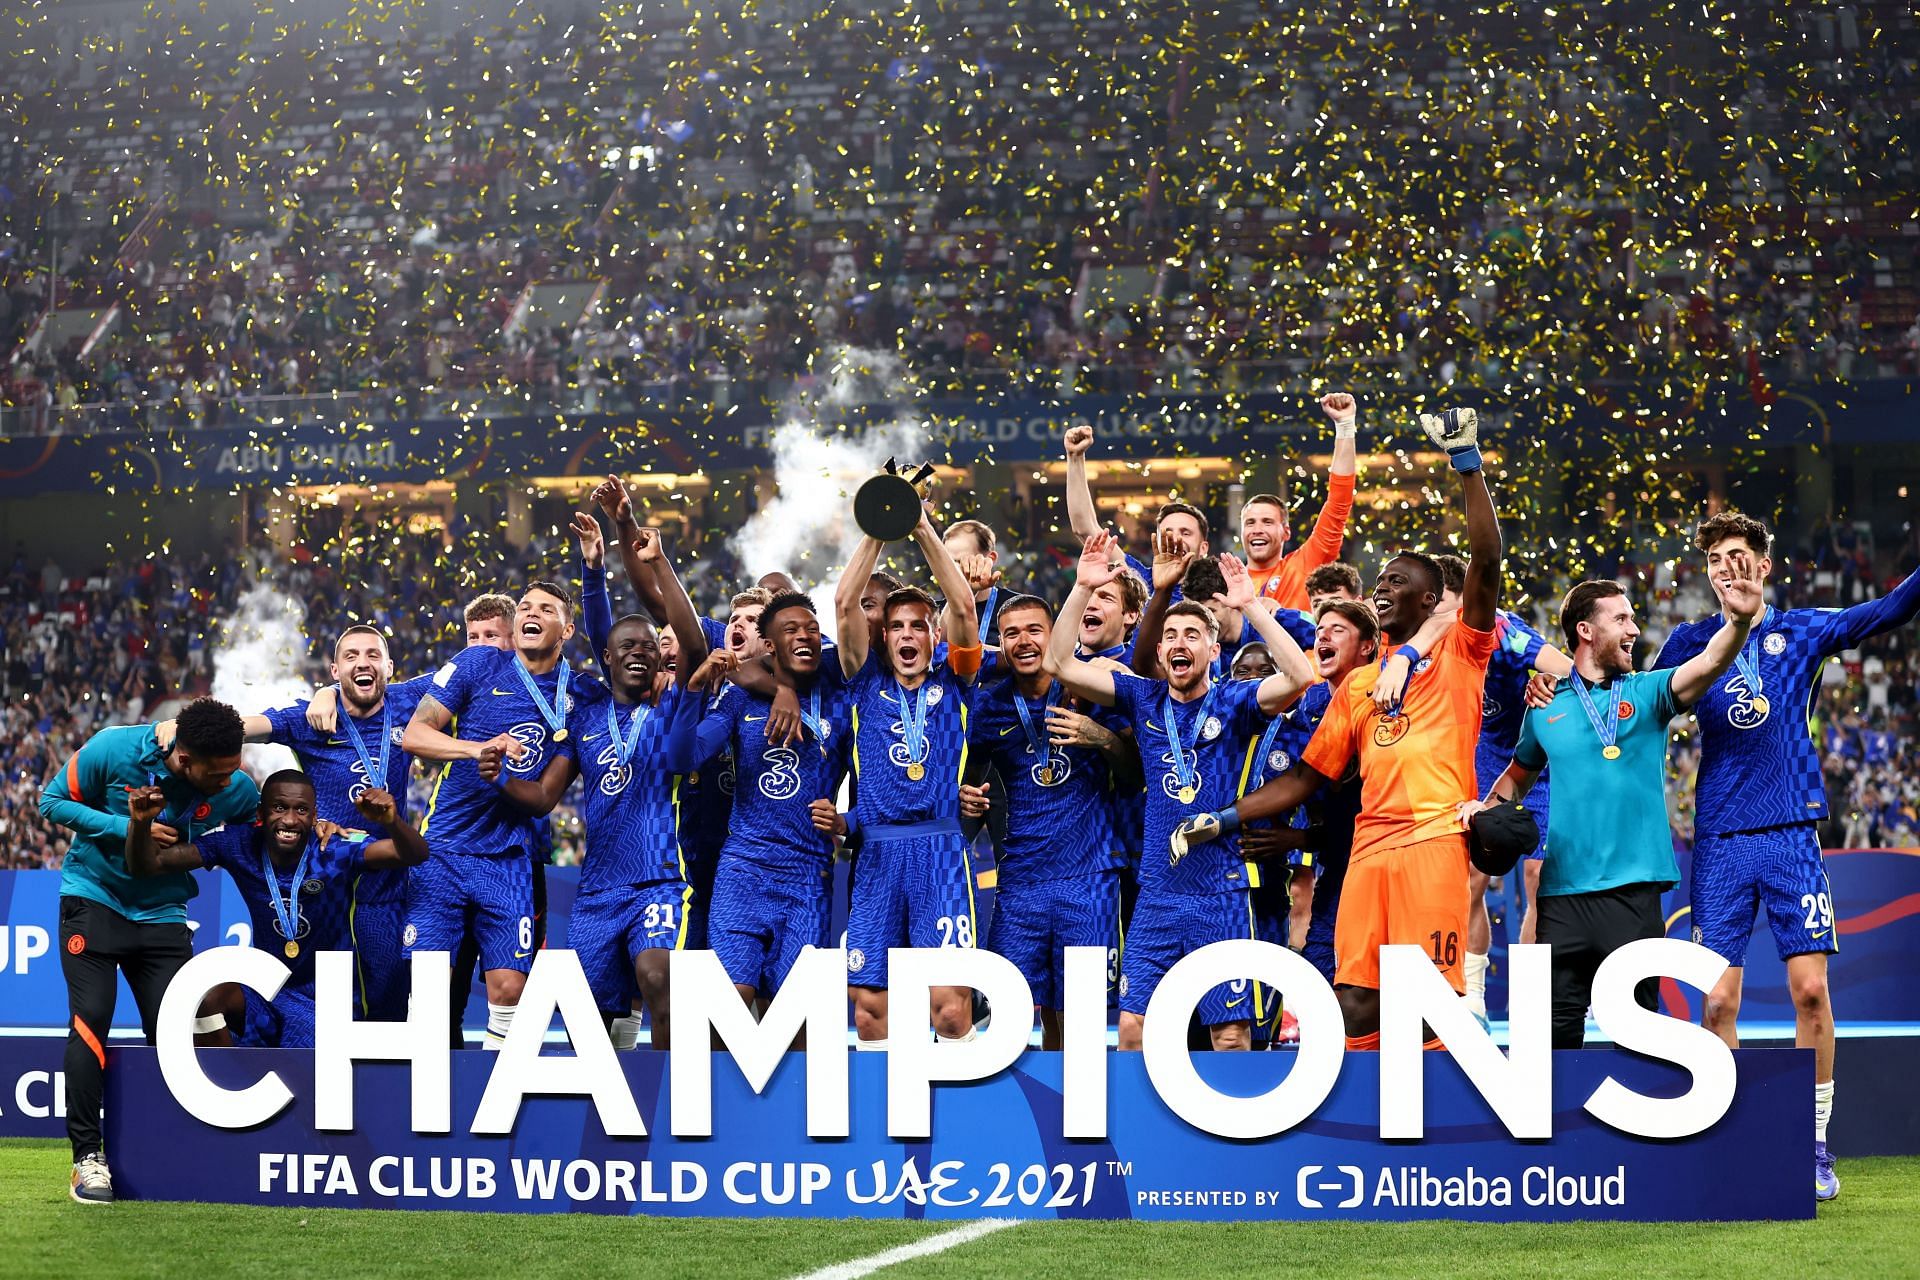 Cesar Azpilicueta lifts the FIFA Club World Cup trophy following the victory.